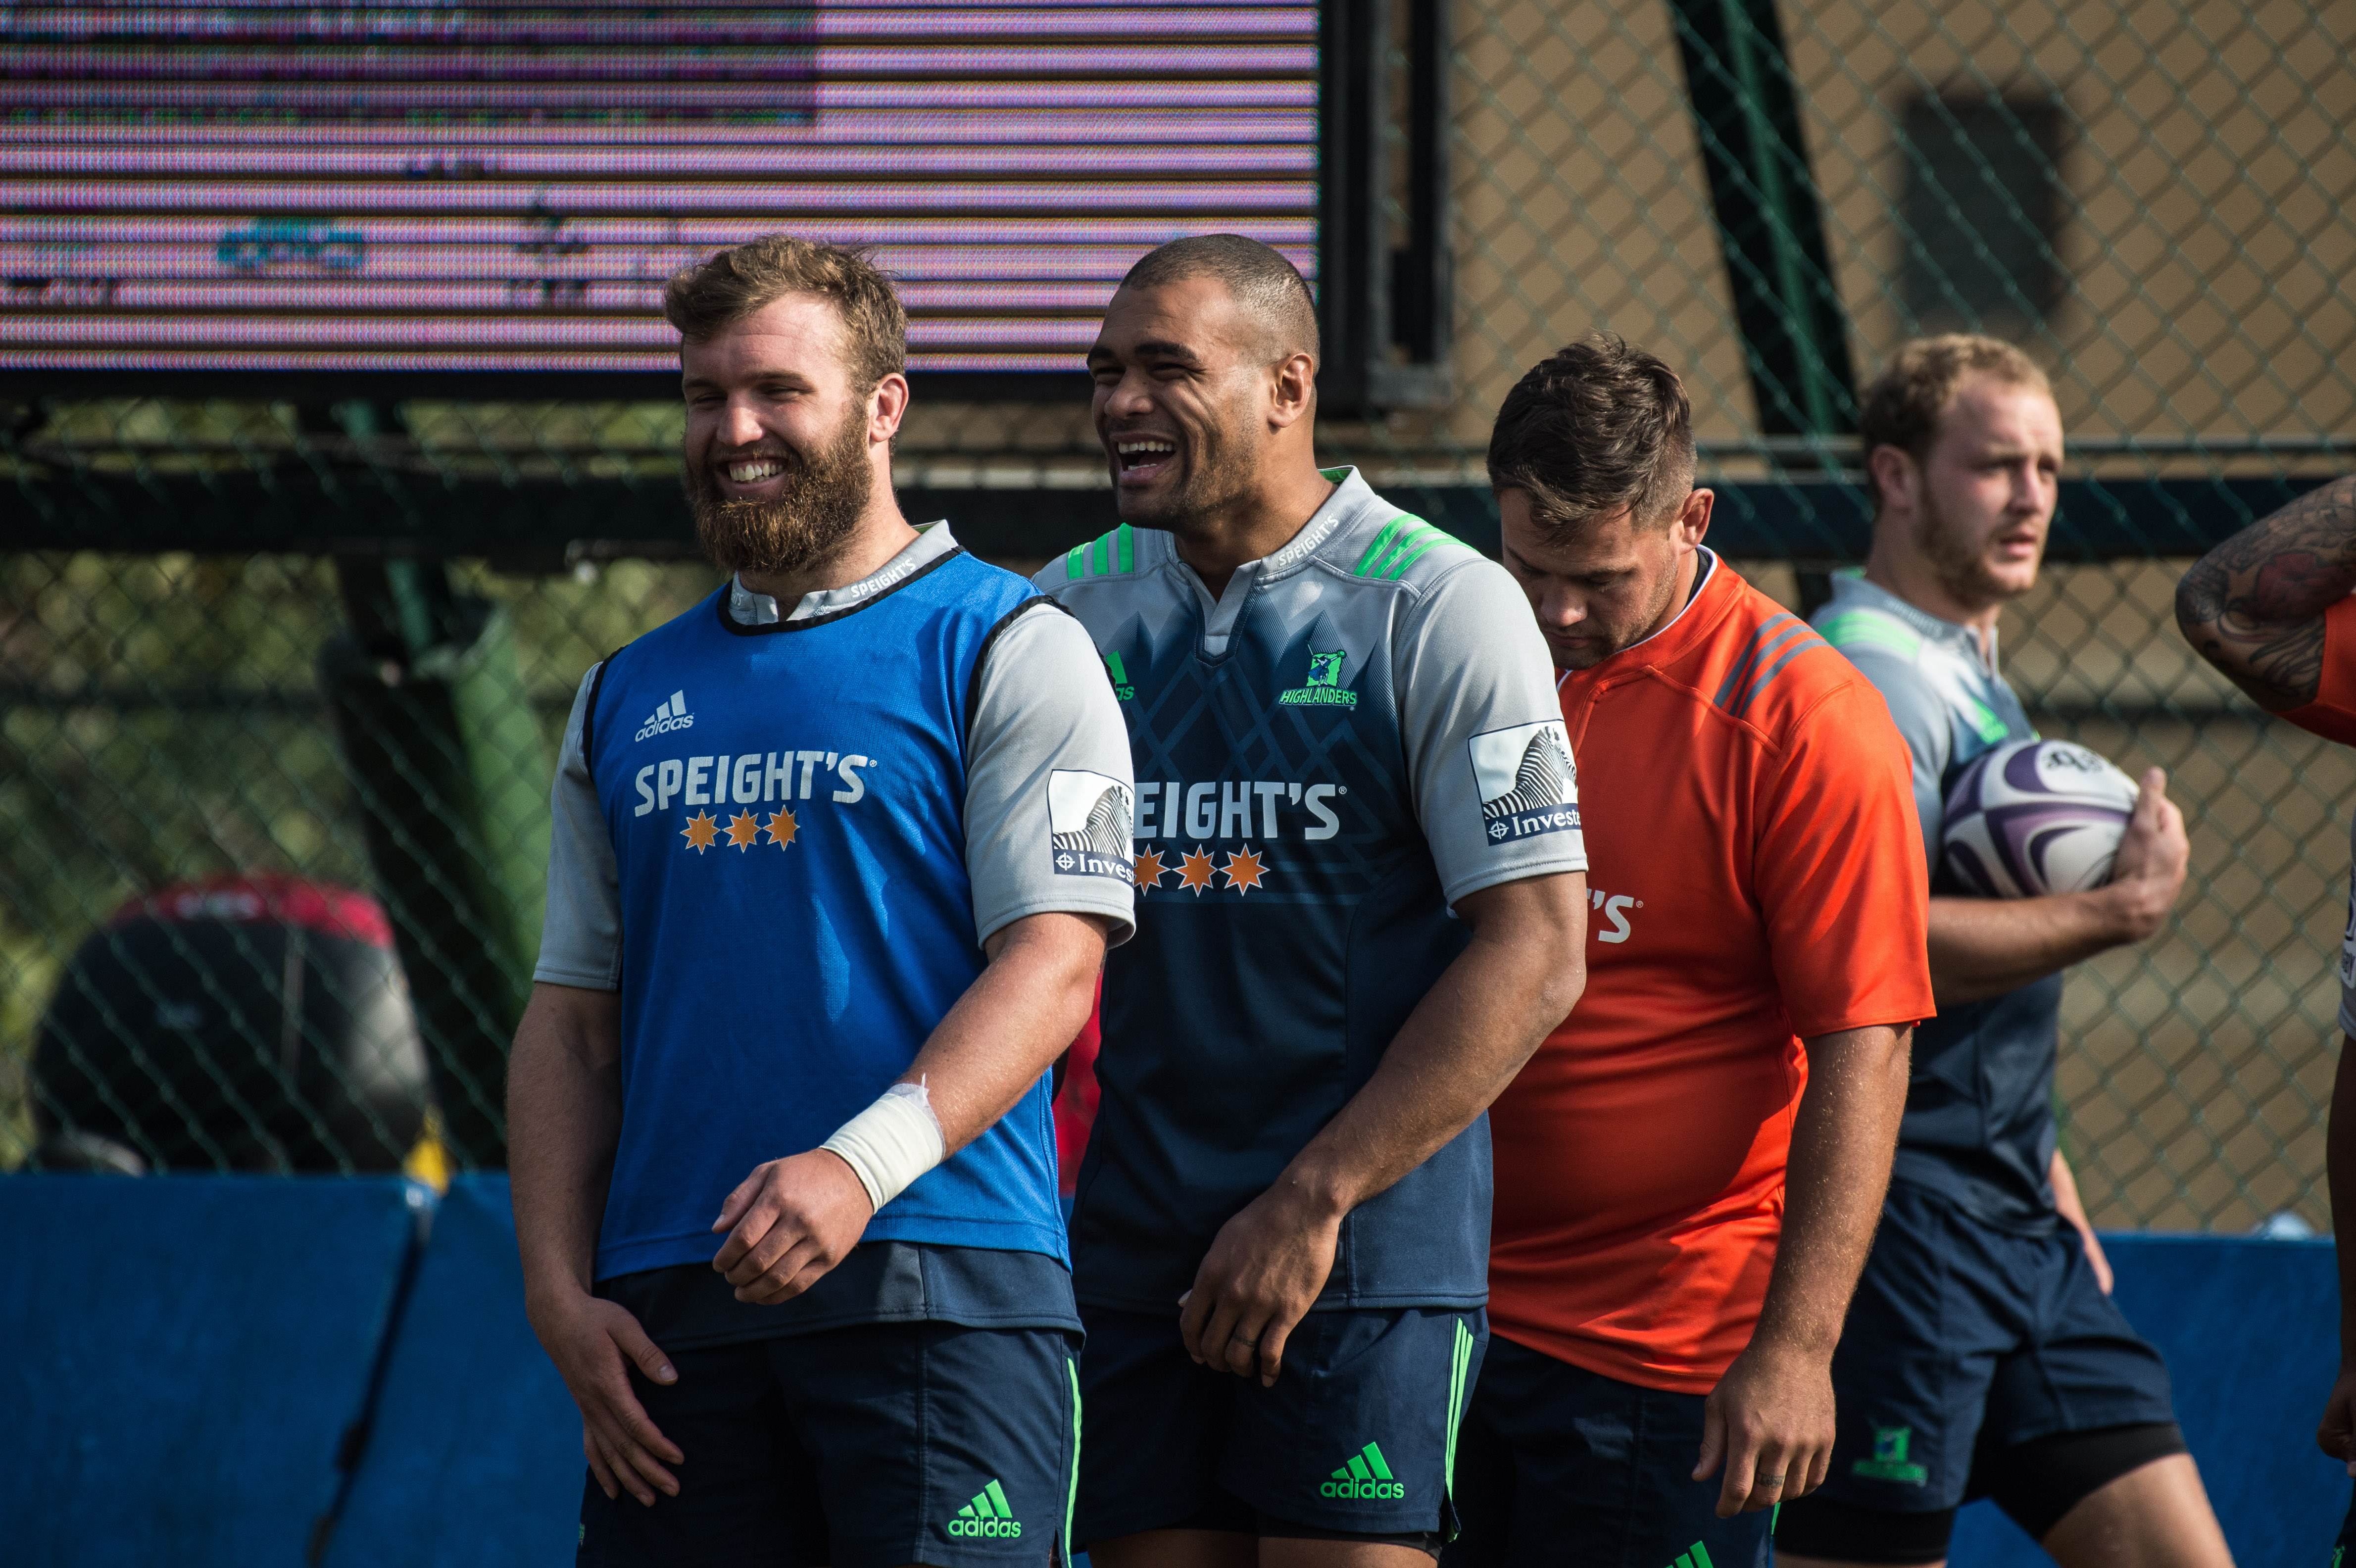 Highlanders players are all smiles, despite a high-intensity workout ahead of their Natixis Cup clash against French side Racing 92. Photo: AFP